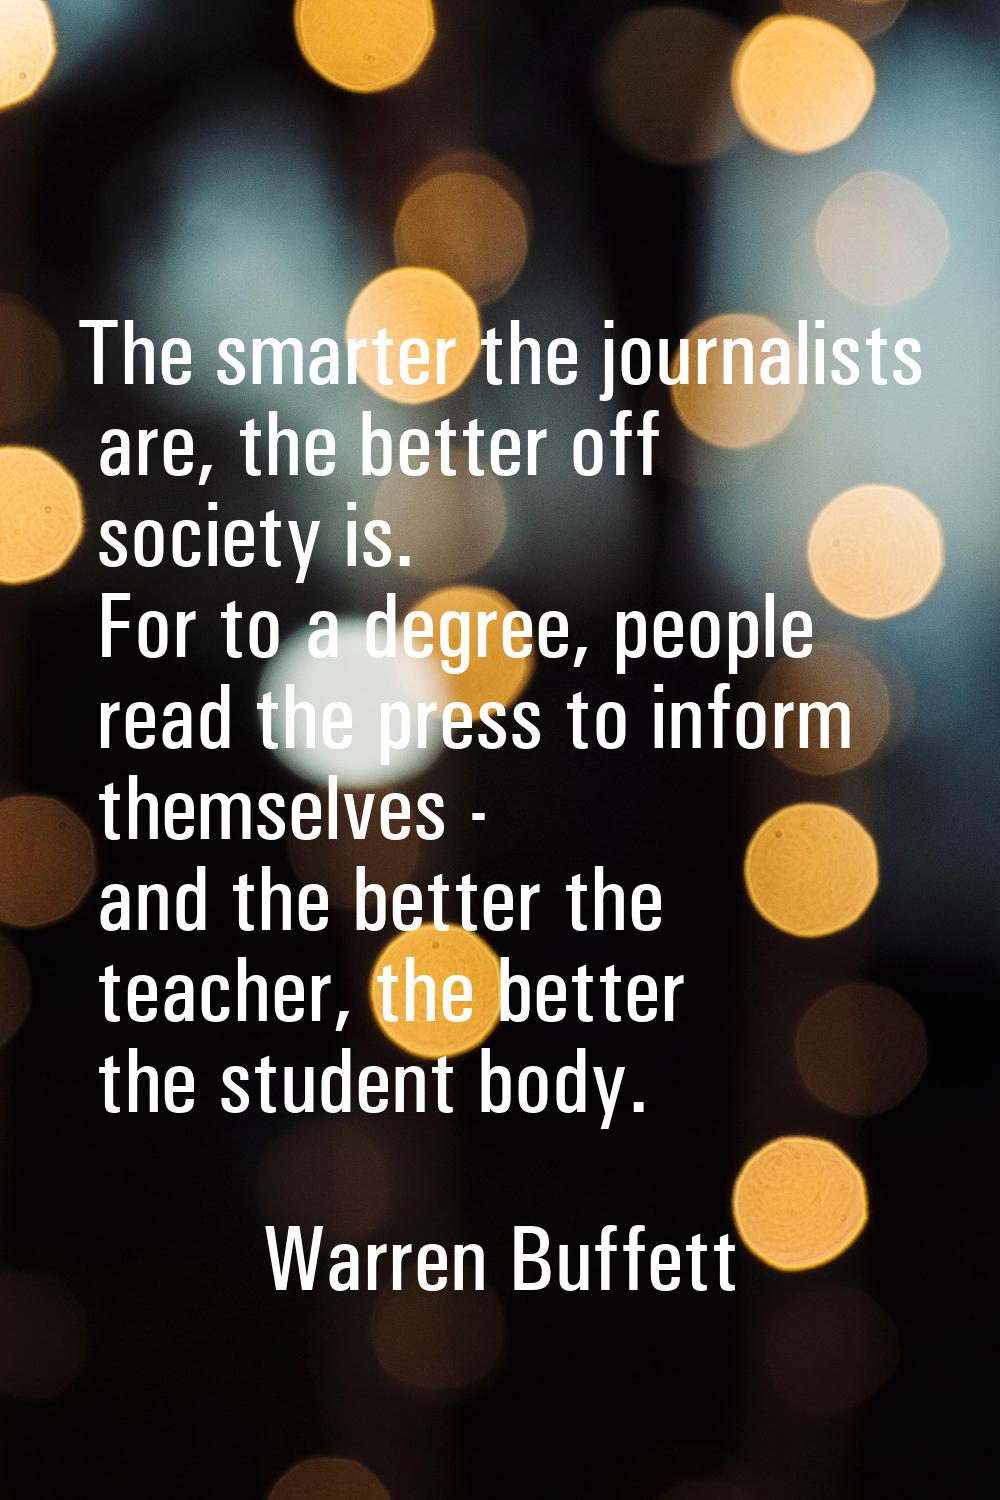 The smarter the journalists are, the better off society is. For to a degree, people read the press 